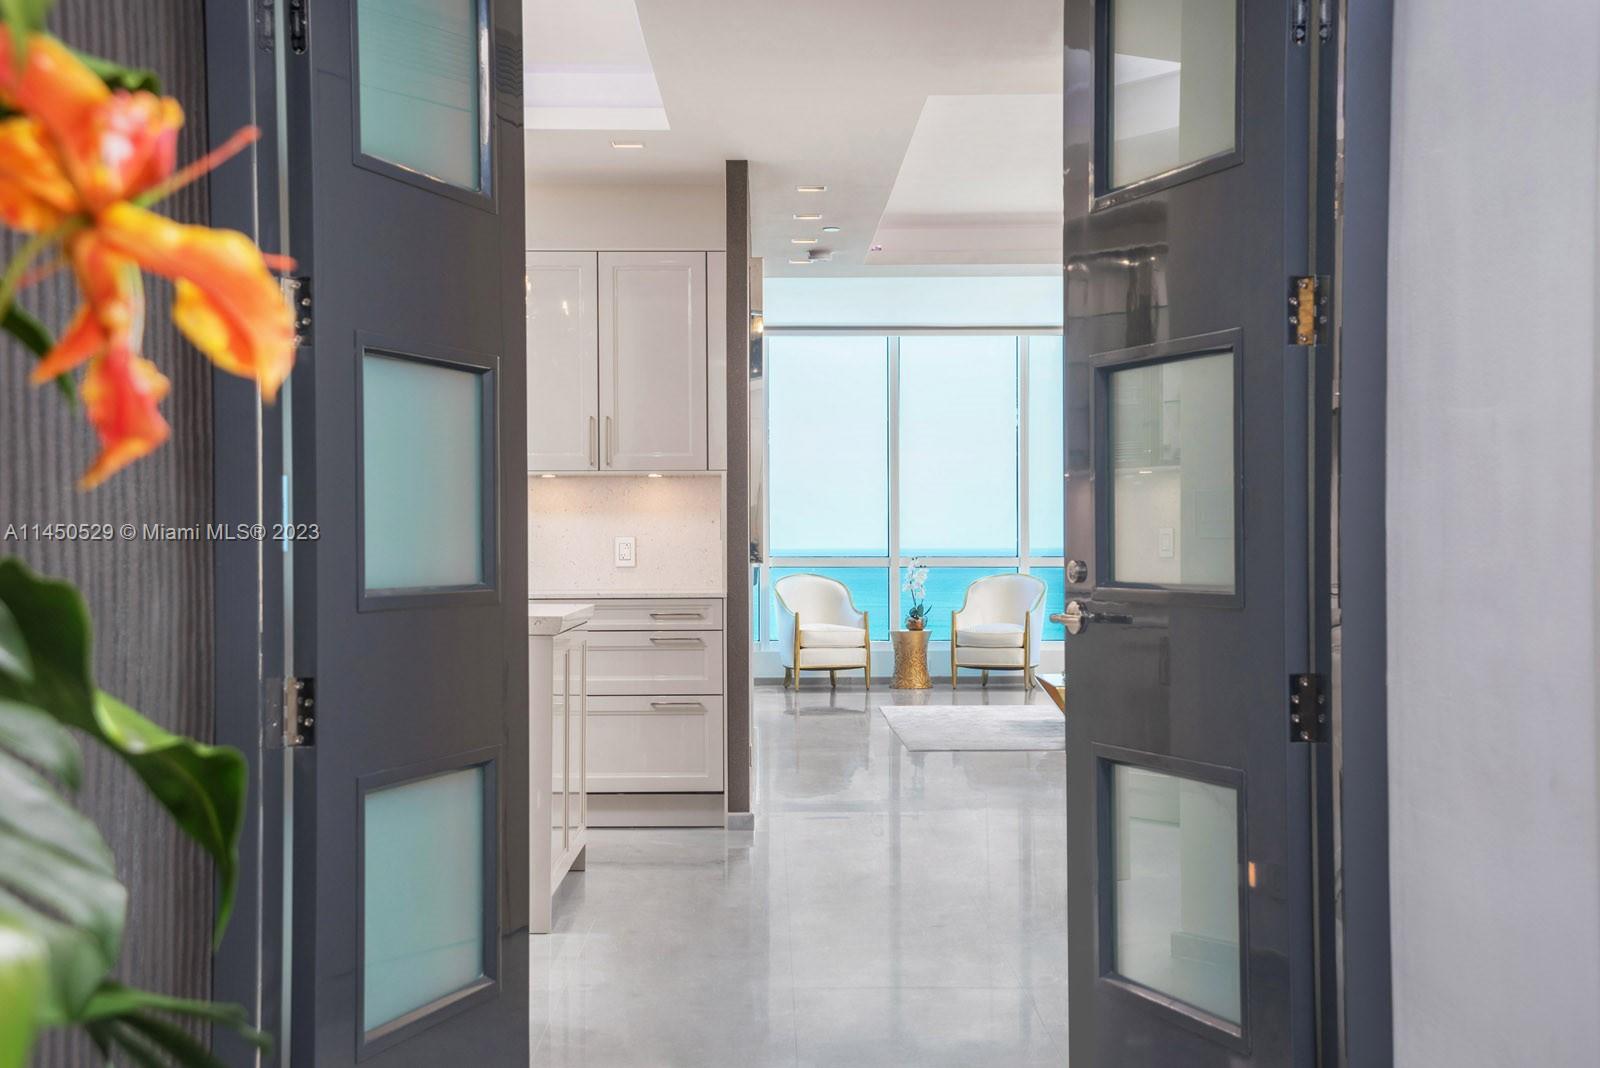 Designer decorated and custom tailored w/the most luxurious finishes. The moment you enter this spectacular and desirable 06-line residence from your private elevator foyer w/double door entry you will be amazed by the breathtaking Ocean View along the entire Beach. Completely upgraded with only the finest and best materials. Very scarce Italian light grey marble floors w/special effects, Siematic German kitchen w/Miele appliances, Porsche Design lighting, Piano lacquered doors, cinema rated wall insulation, Cavalli Wall paper, Neff closets, Dornbracht fixtures, no expenses have been spared in this completely upgraded Diamond in the sky. List w/upgrades available! Hardly lived in, like new! Converted!